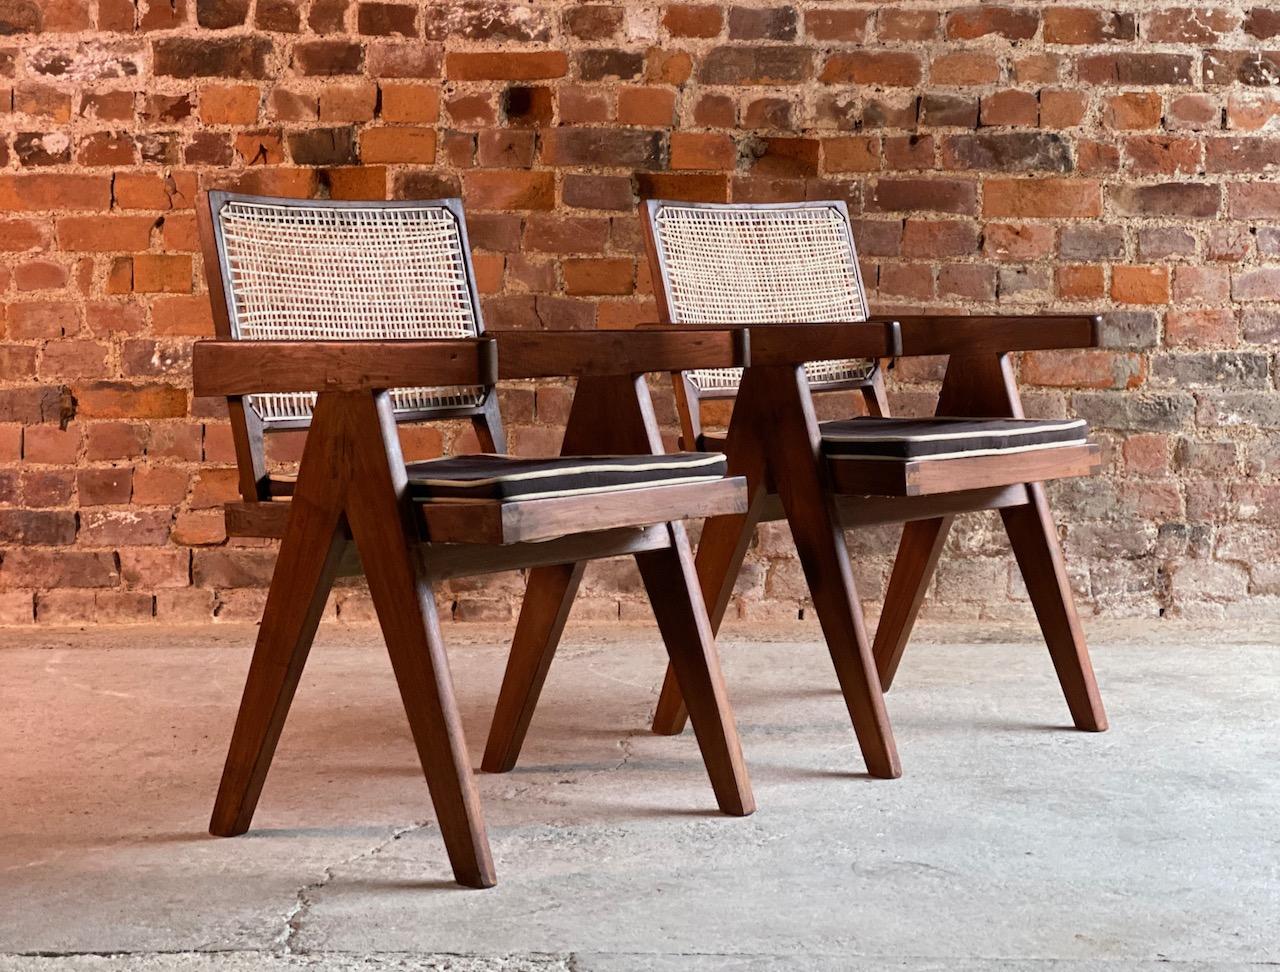 Pierre Jeanneret V leg chairs pair in teak and cane Chandigarh, circa 1955

Magnificent pair of Pierre Jeanneret (1896-1967) fixed back V leg conference chairs from the College of Architecture, Chandigarh India Circa 1955, the chairs featuring an